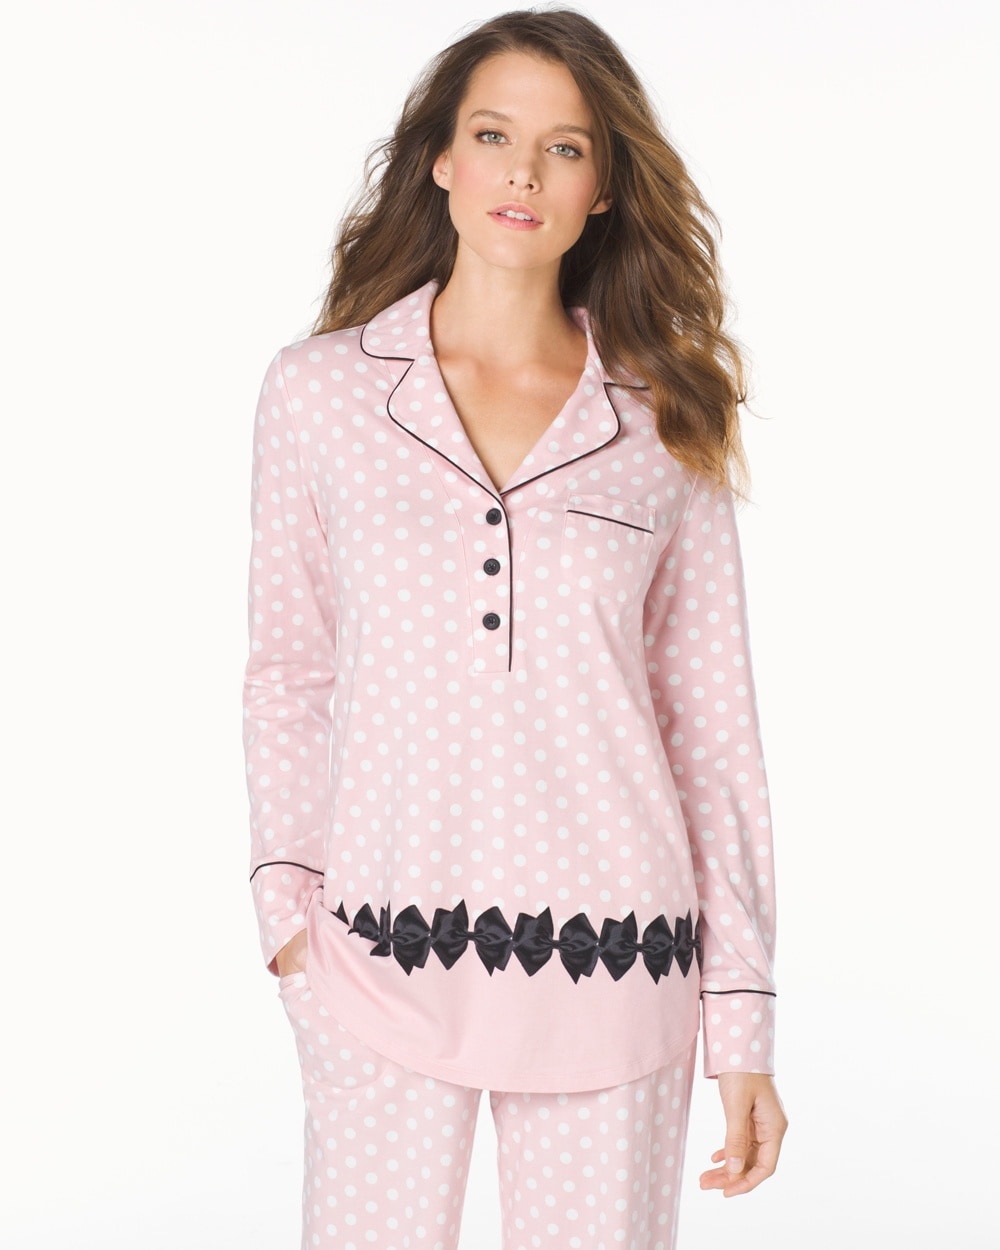 Embraceable Long Sleeve Popover Pajama Top Big Dot Pink Rom Bows Border